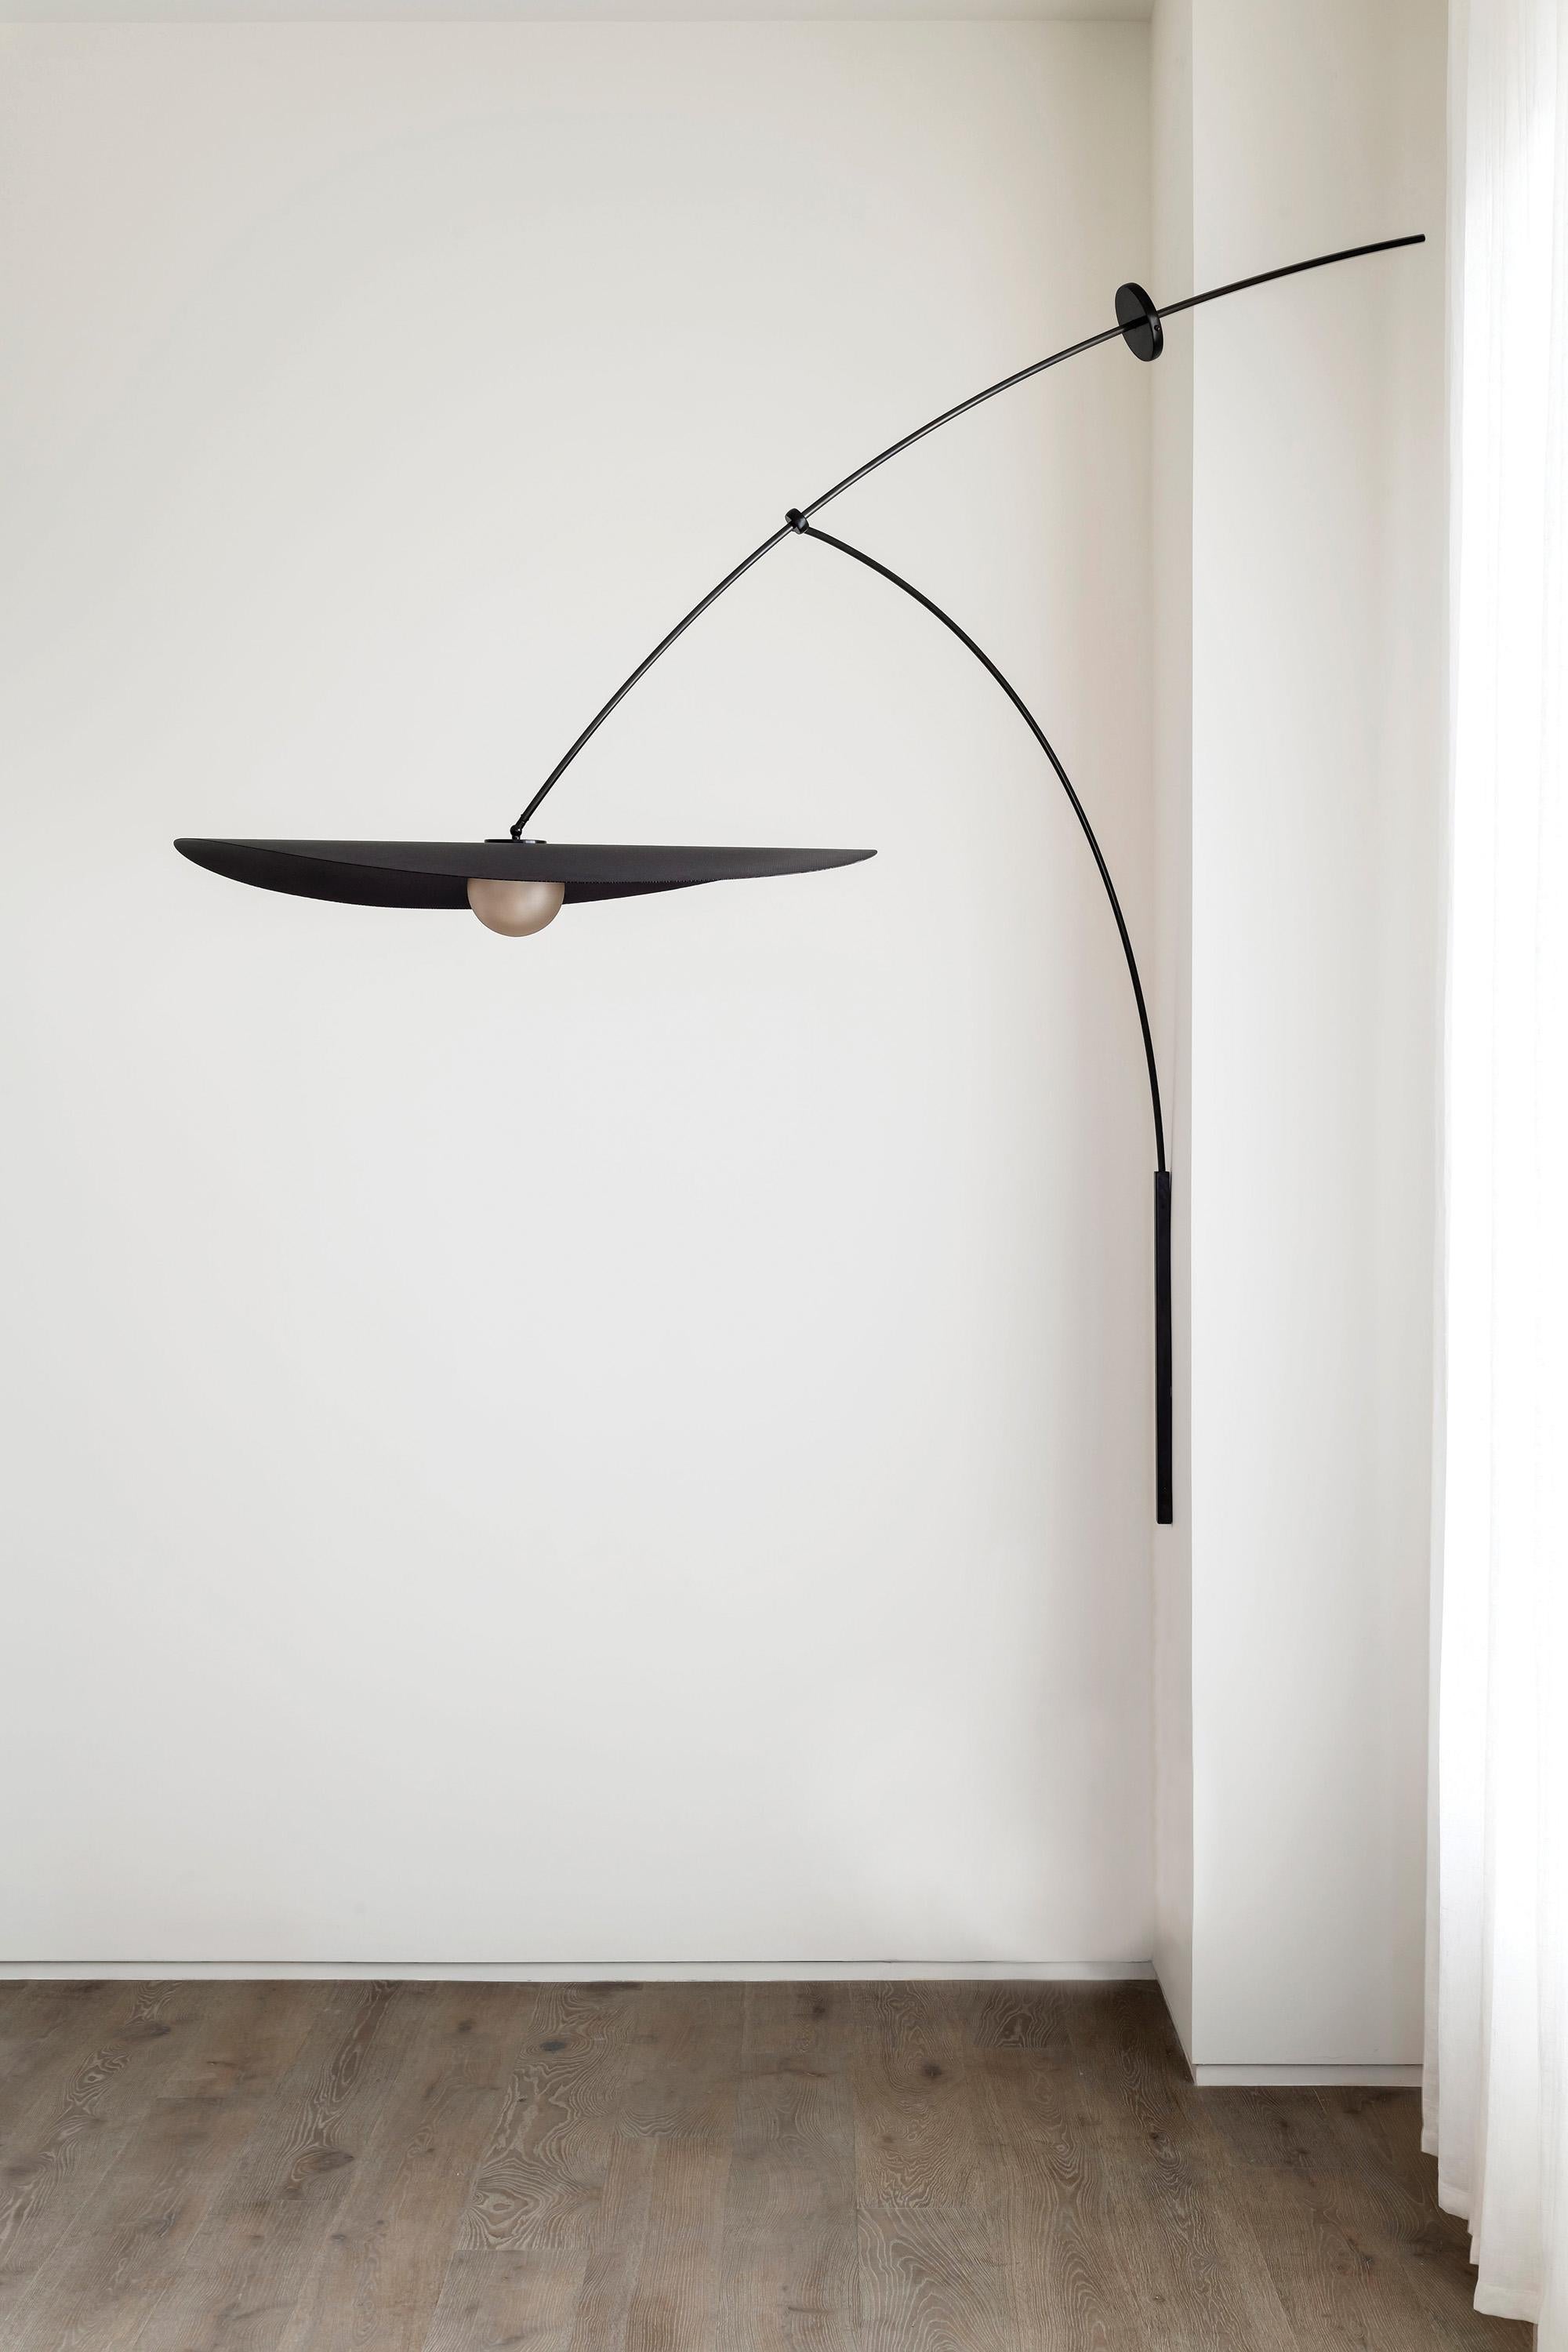 L&G Studio is proud to present a Myrna, capturing a moment of suspension in space.

The Myrna Wall Mounted light is a large scale light sculpture suspended from the wall and carefully balanced on an articulating, adjustable arm. The height of the